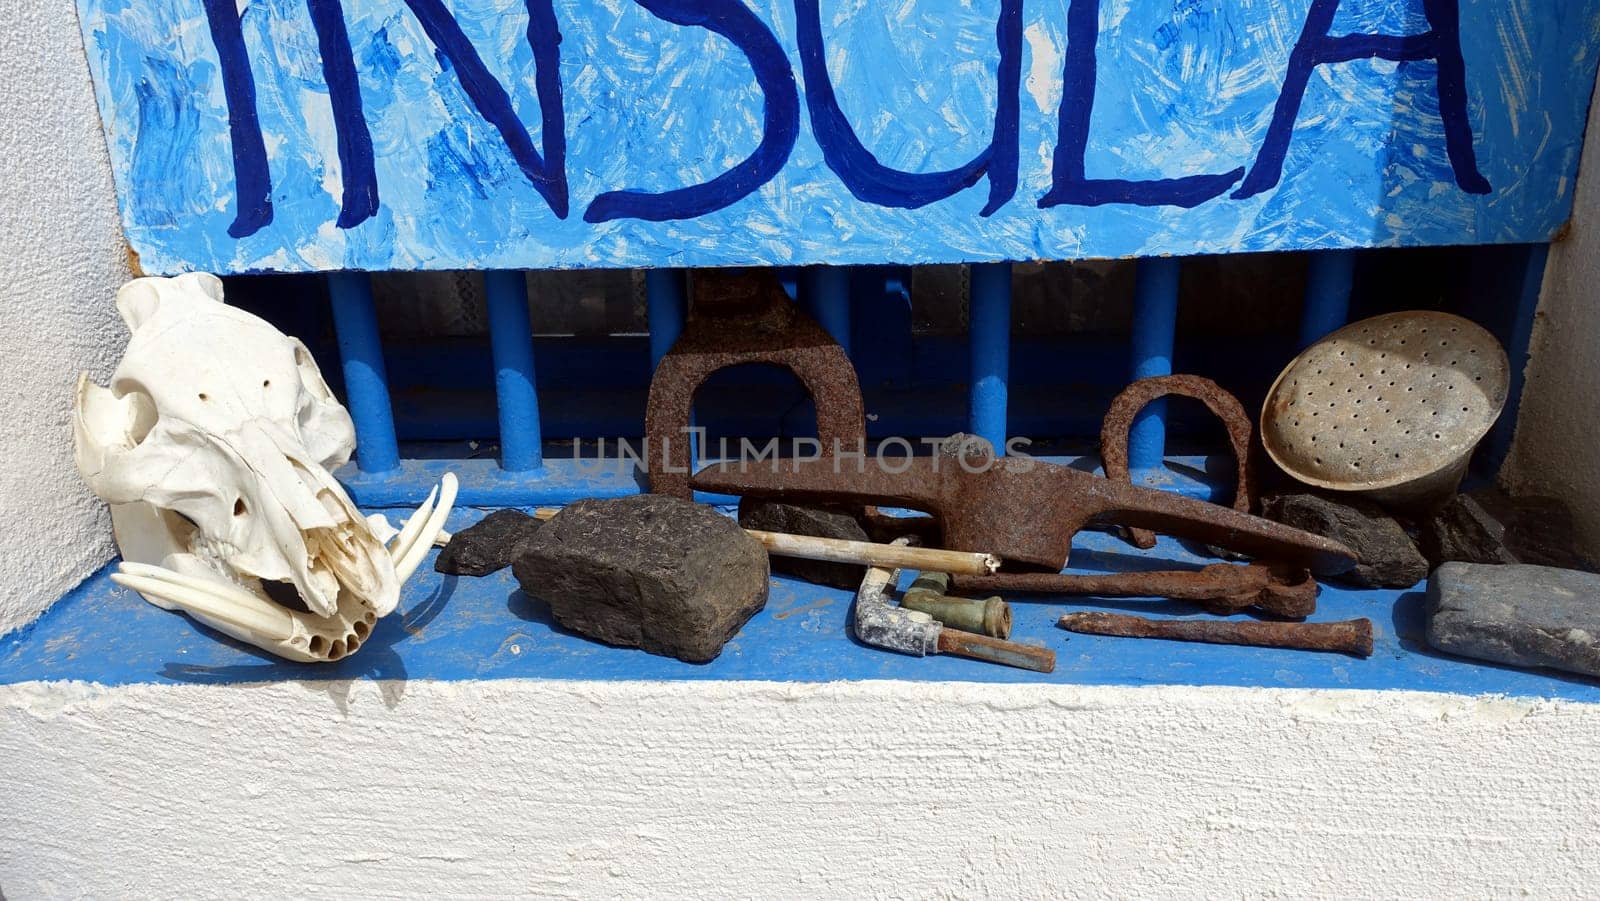 Asinara, Italy. August 11, 2021. A boar skull and some ancient tools on a window of the prison museum on the hill of the island.